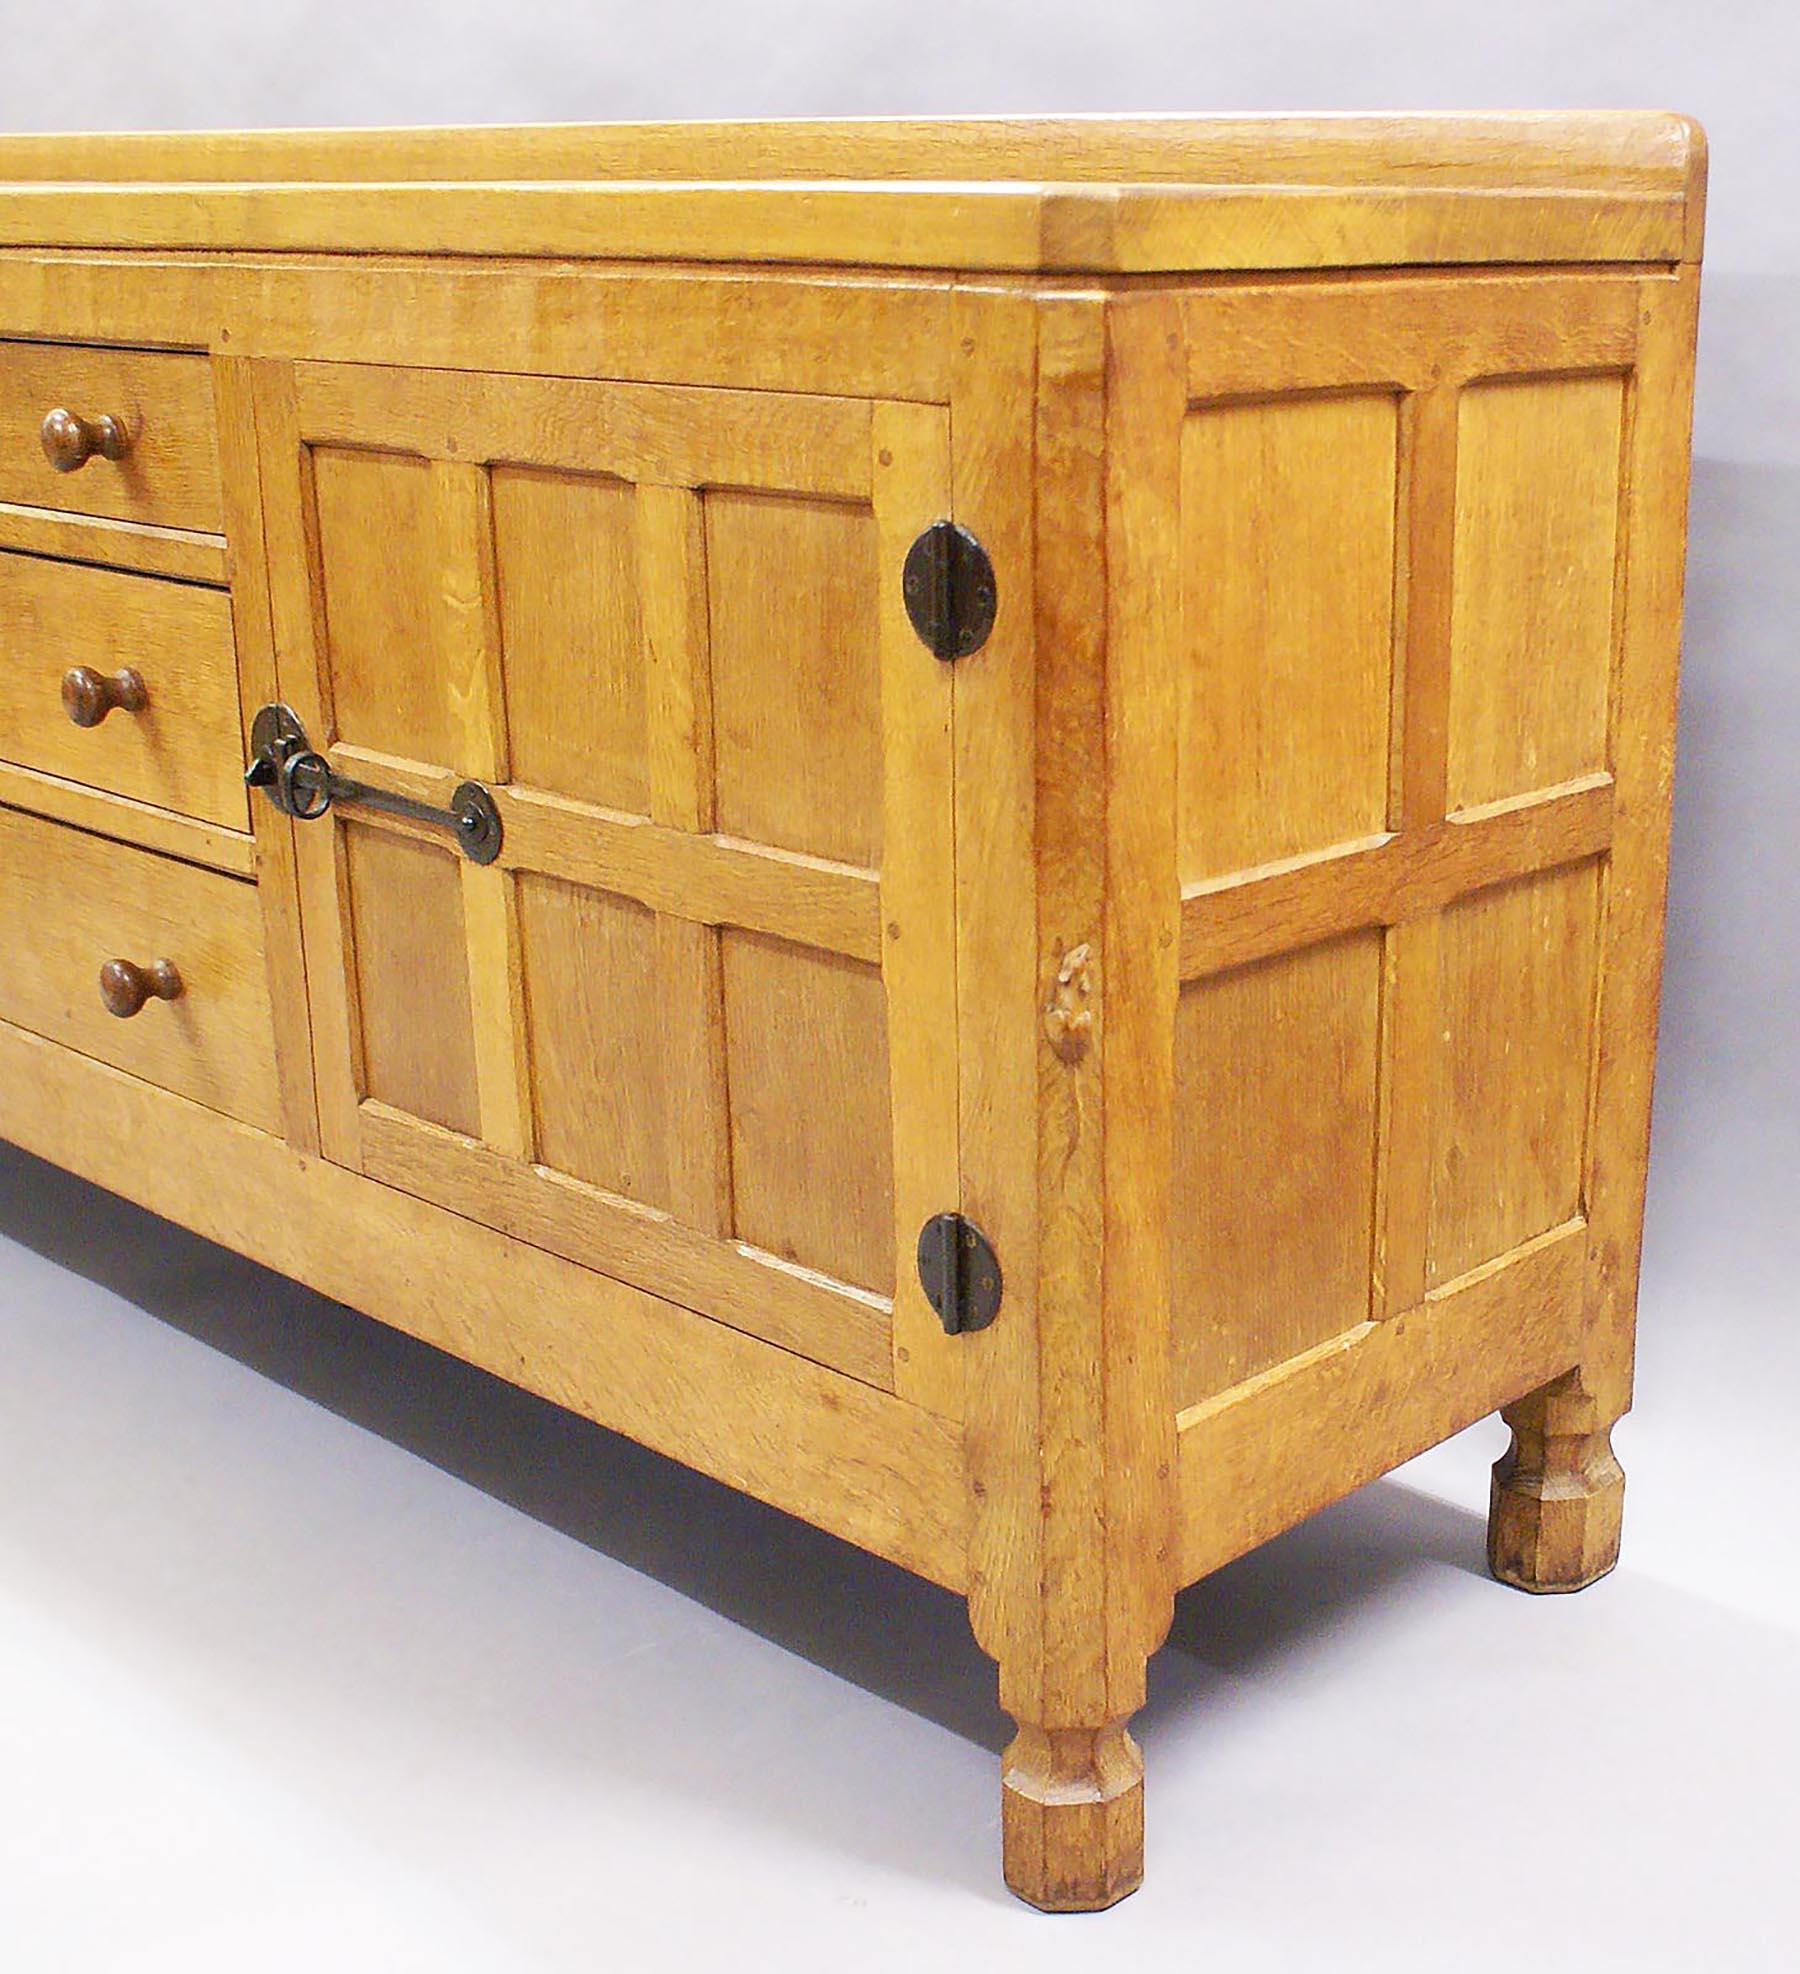 This beautiful and well-proportioned sideboard was made by Robert Thompson, a prolific and well-known furniture maker of the period. A small carved mouse was his signature and trademark, which eventually became his nickname.
Robert Thompson, born